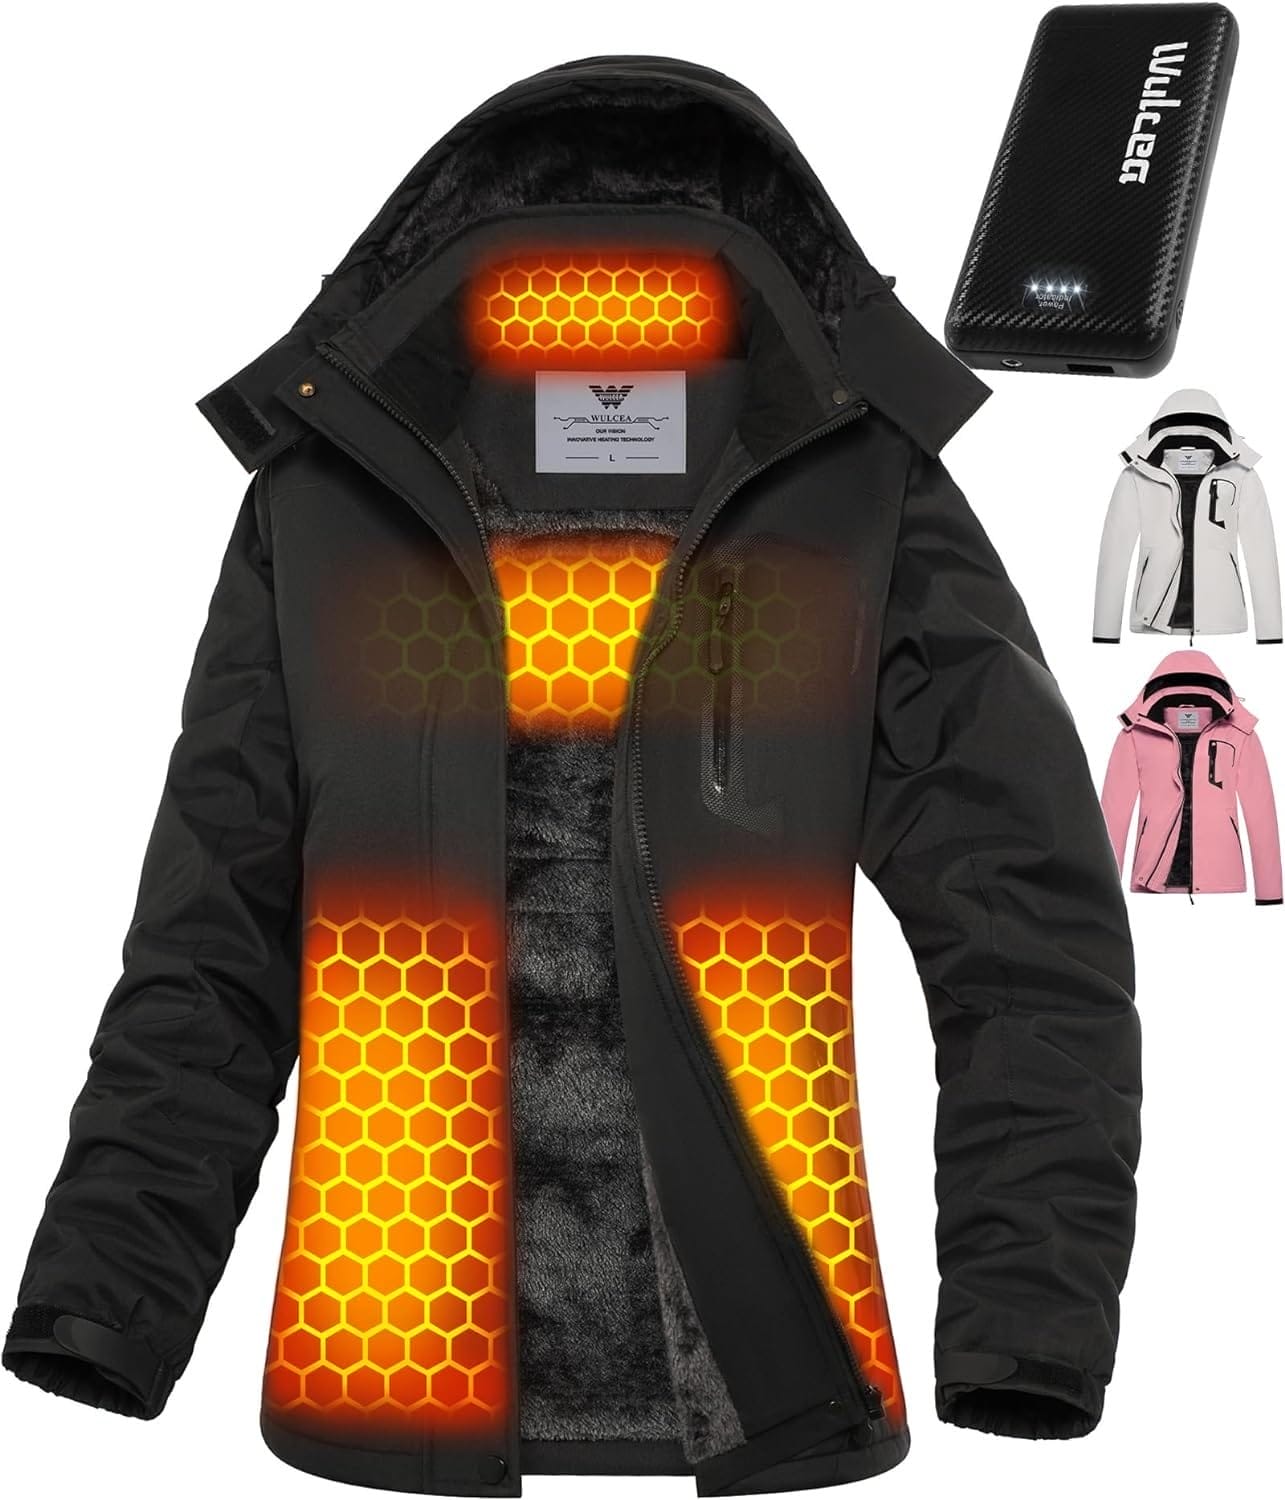 You are currently viewing Product Comparison: Women’s Heated Jacket, Waterproof Beach Blanket, Camping Utensil, Cookware Set, Collapsible Sink